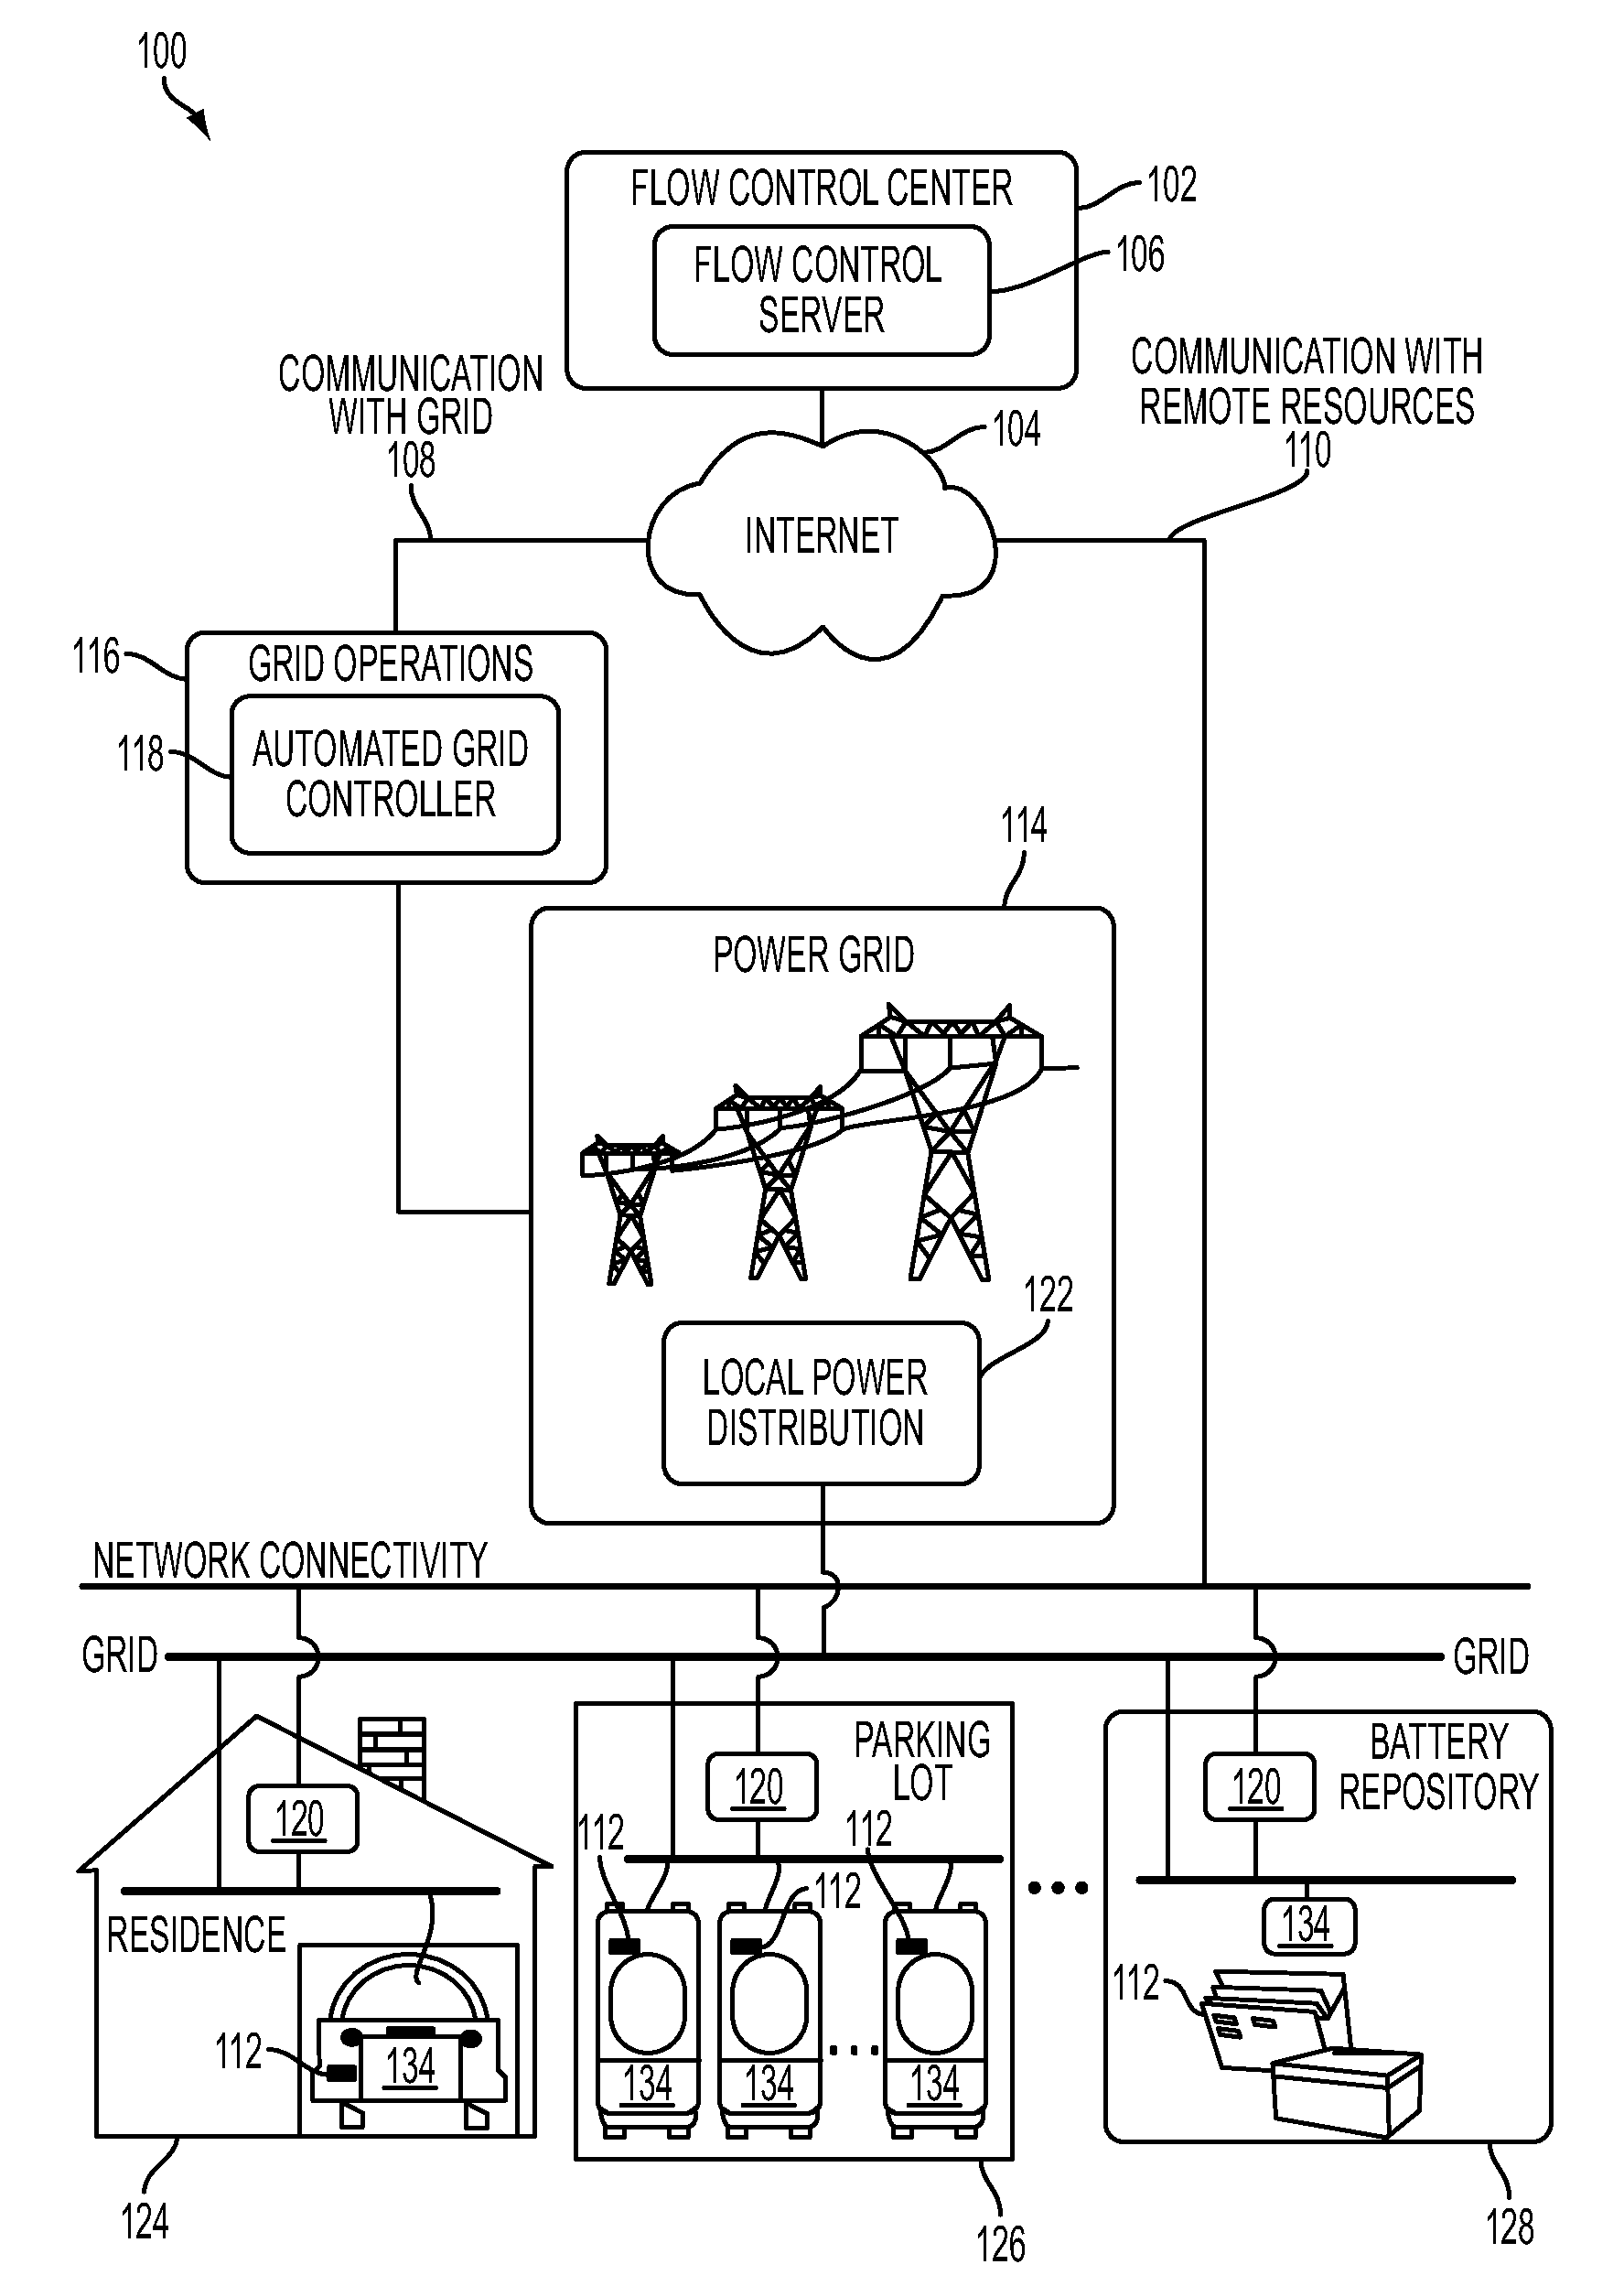 System and methods for smart charging techniques